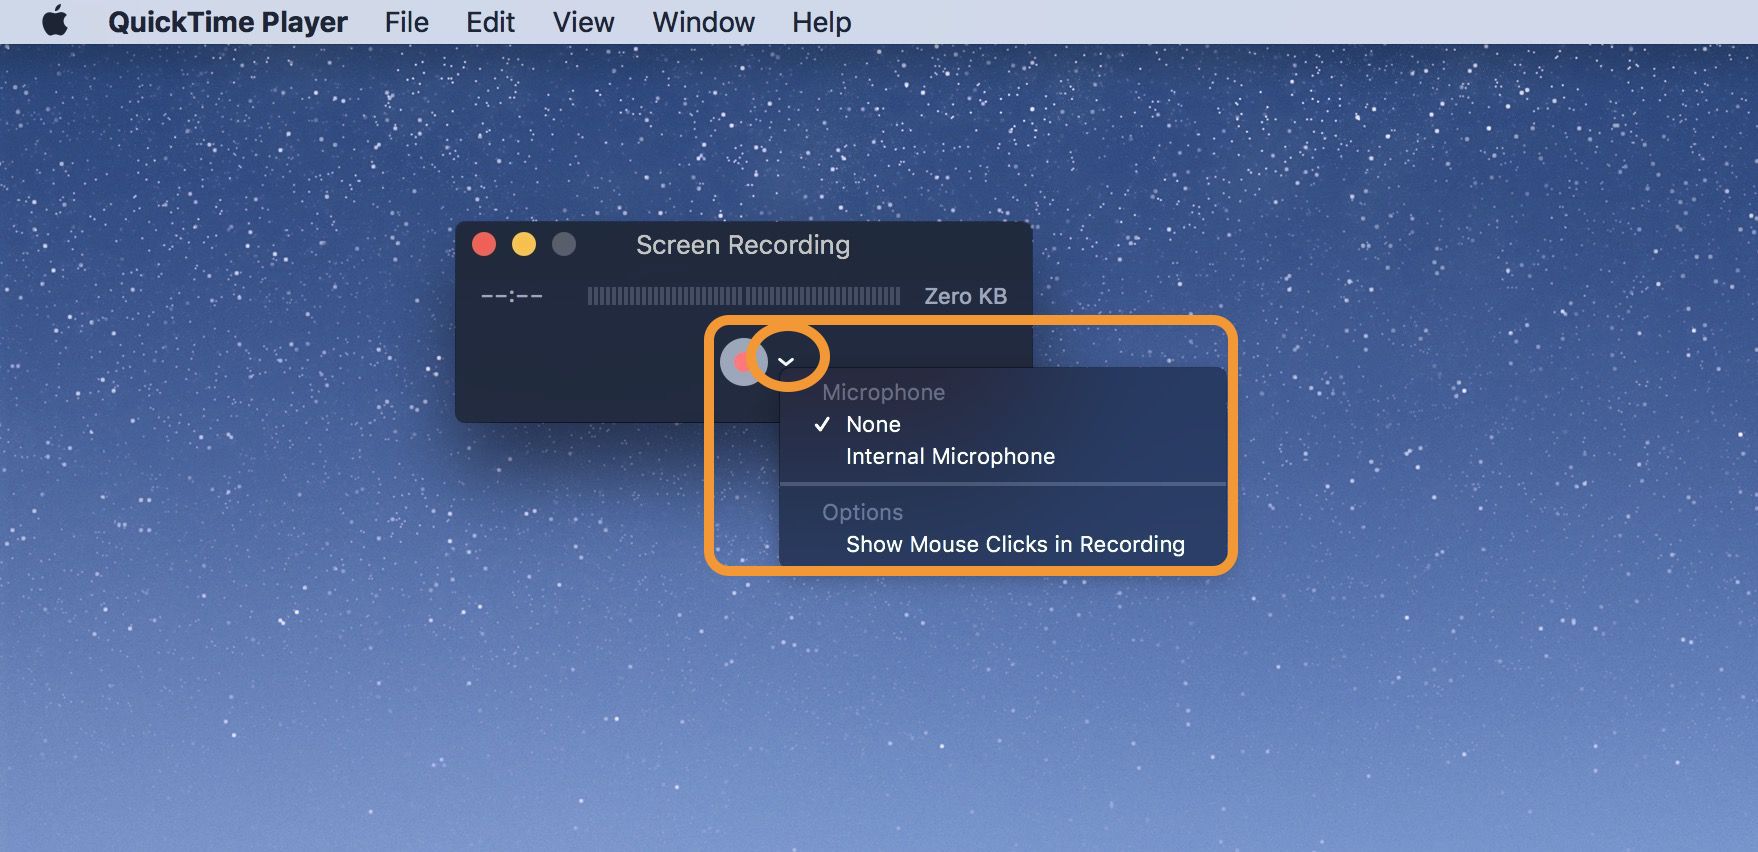 how to make video fit screen quicktime player mac